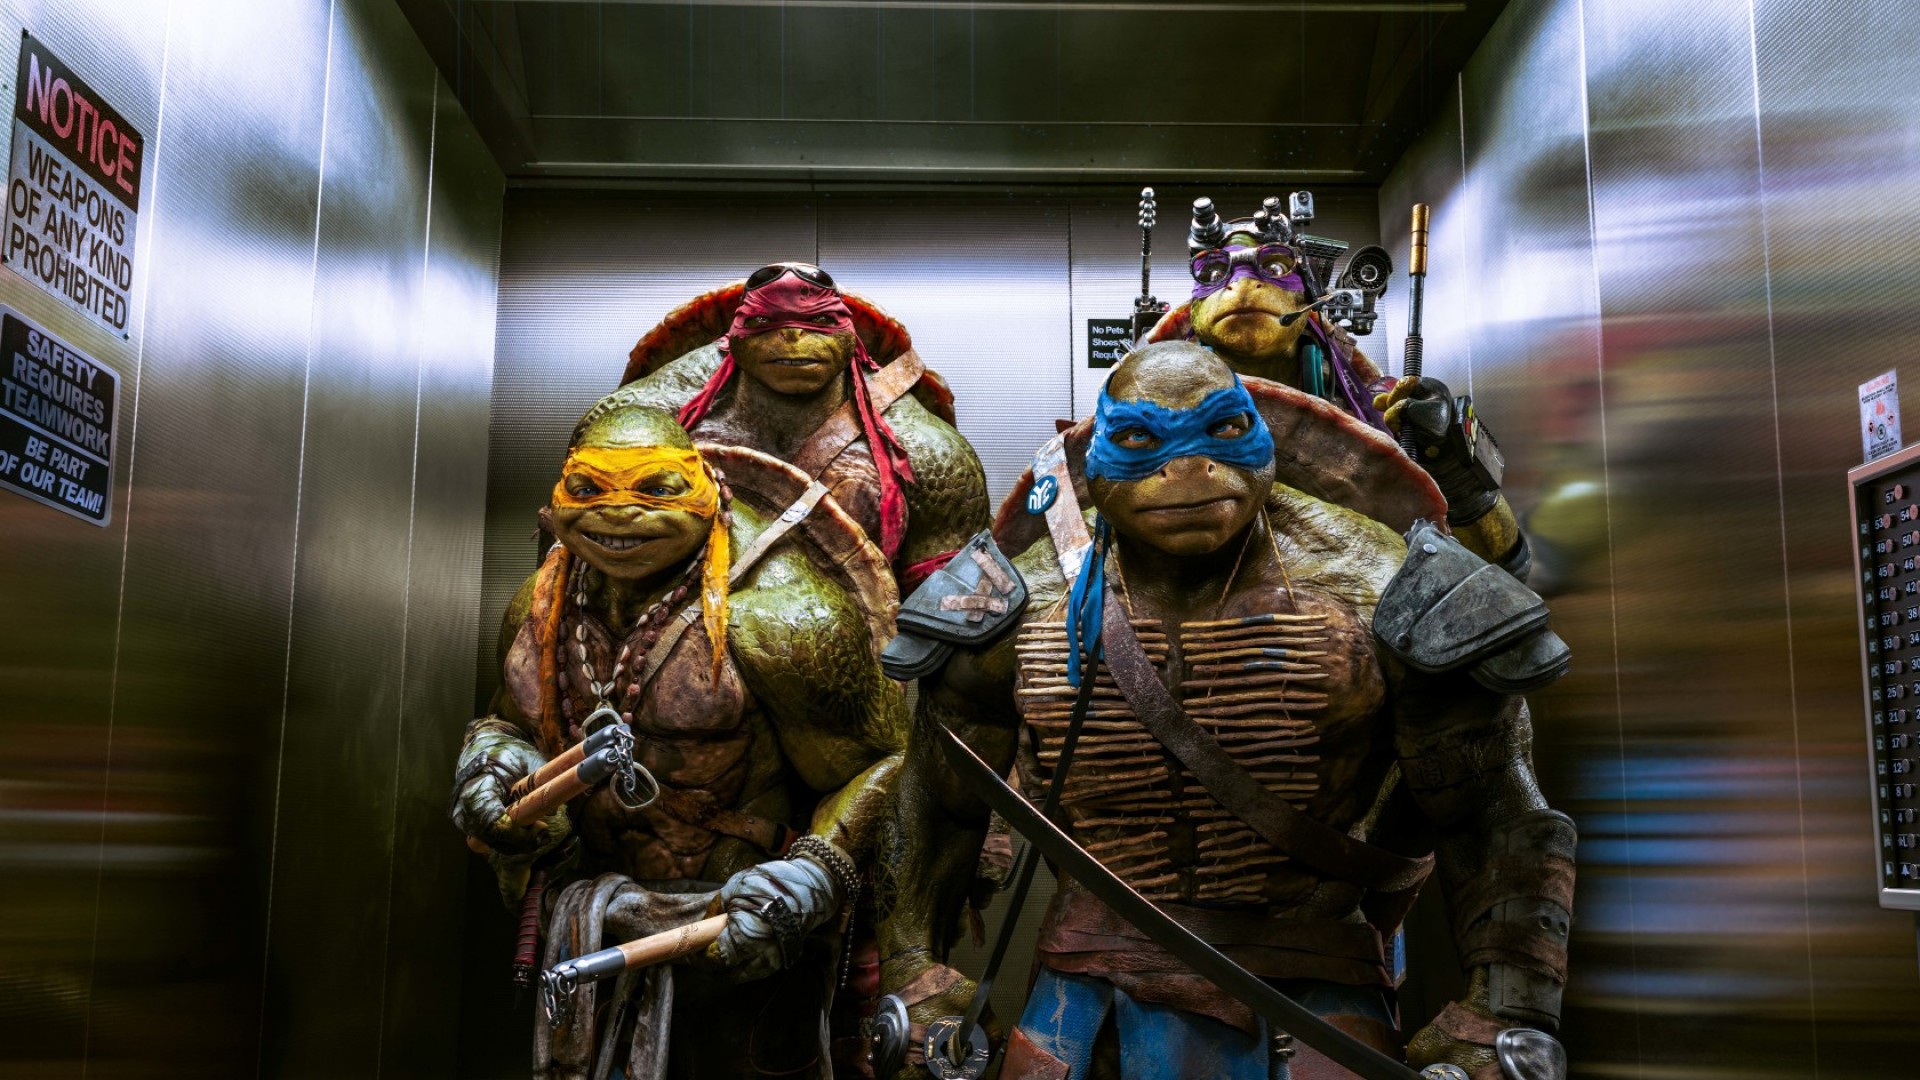 1920x1080 ... raphael news, pictures and videos and learn all about teenage mutant  ninja turtles, leonardo, raphael from wallpapers4u.org, your wallpaper news  source.